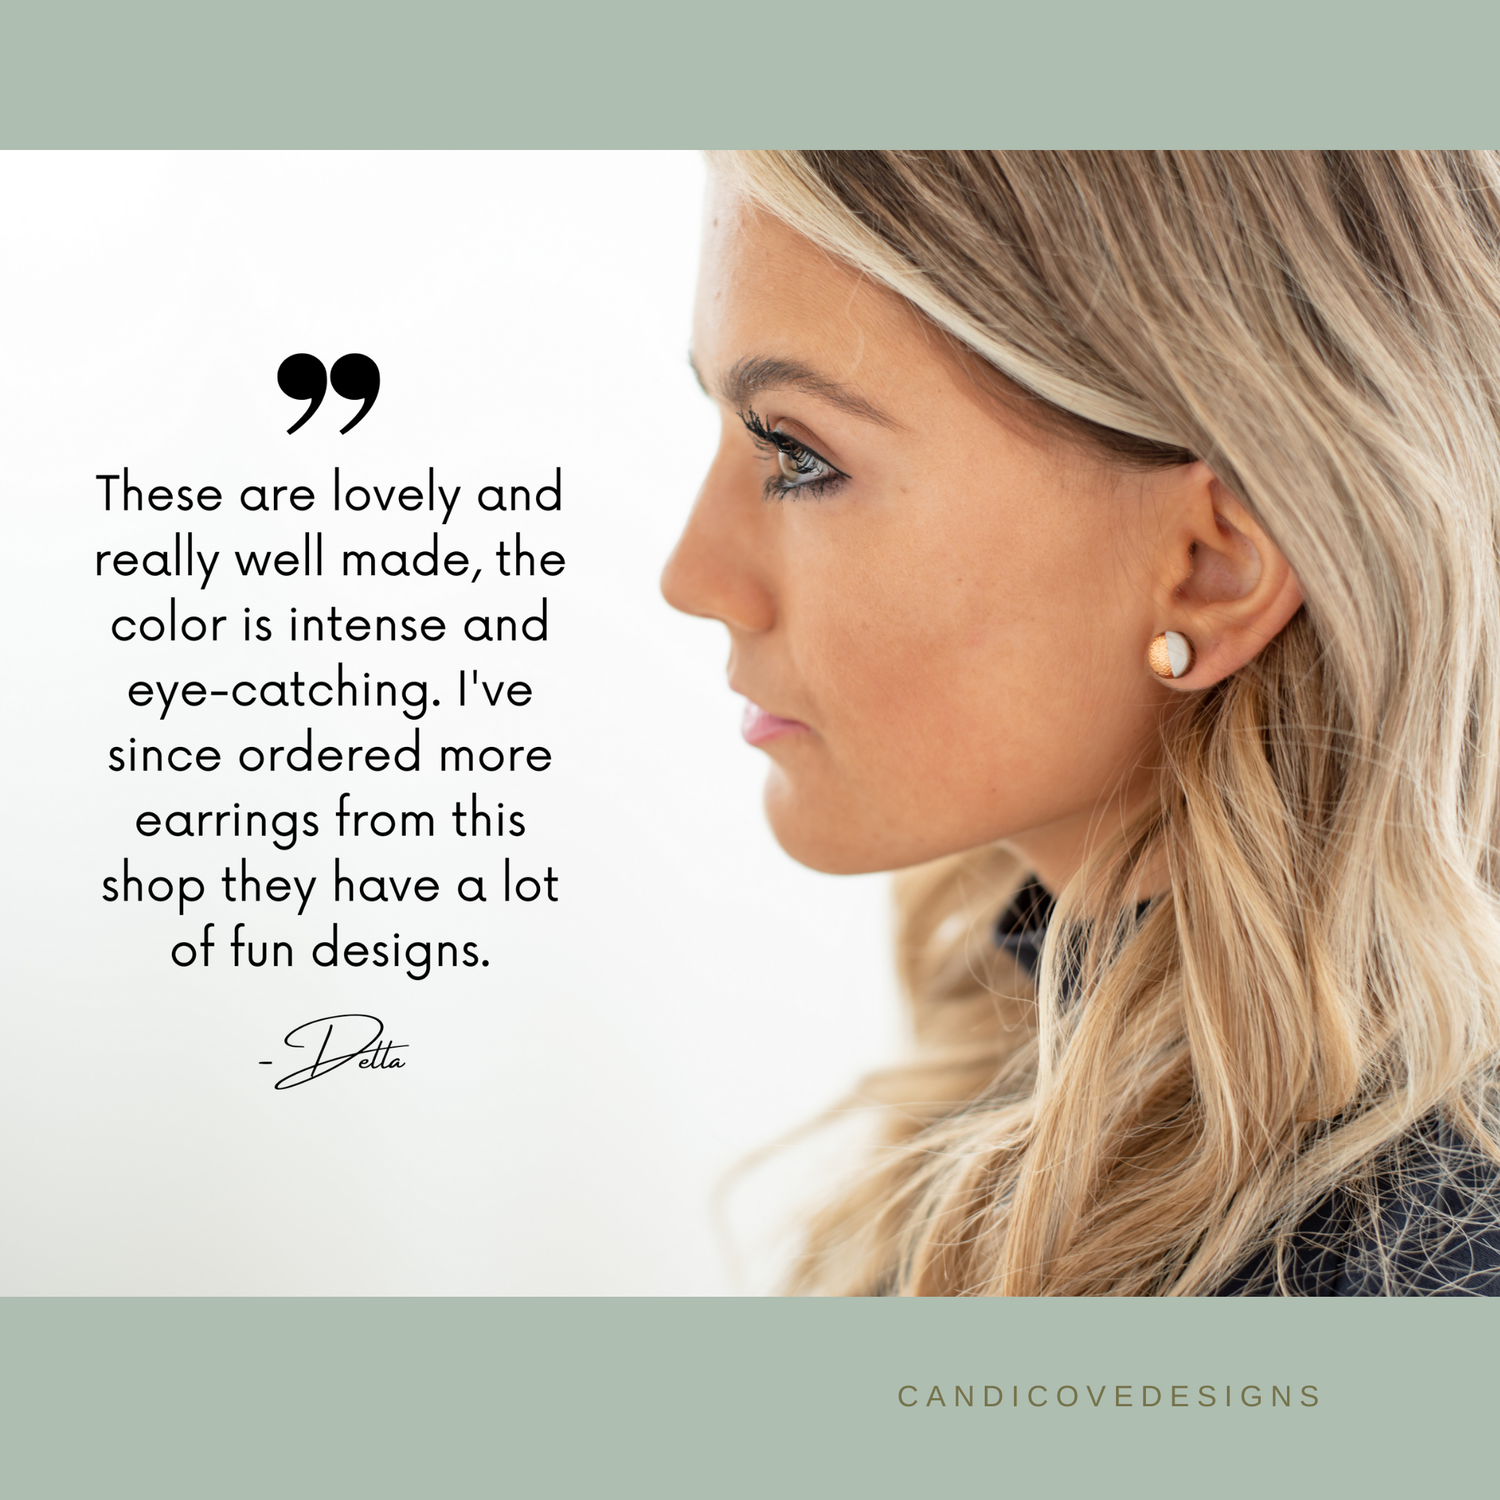 Candi Cove Designs Everyday Simple Stud Earrings Review: Grey and Rose Gold Two-Toned Faux Hammered Metal Earrings, Hypoallergenic and Perfect for Sensitive Ears, Modeled on a Woman for a Realistic Look